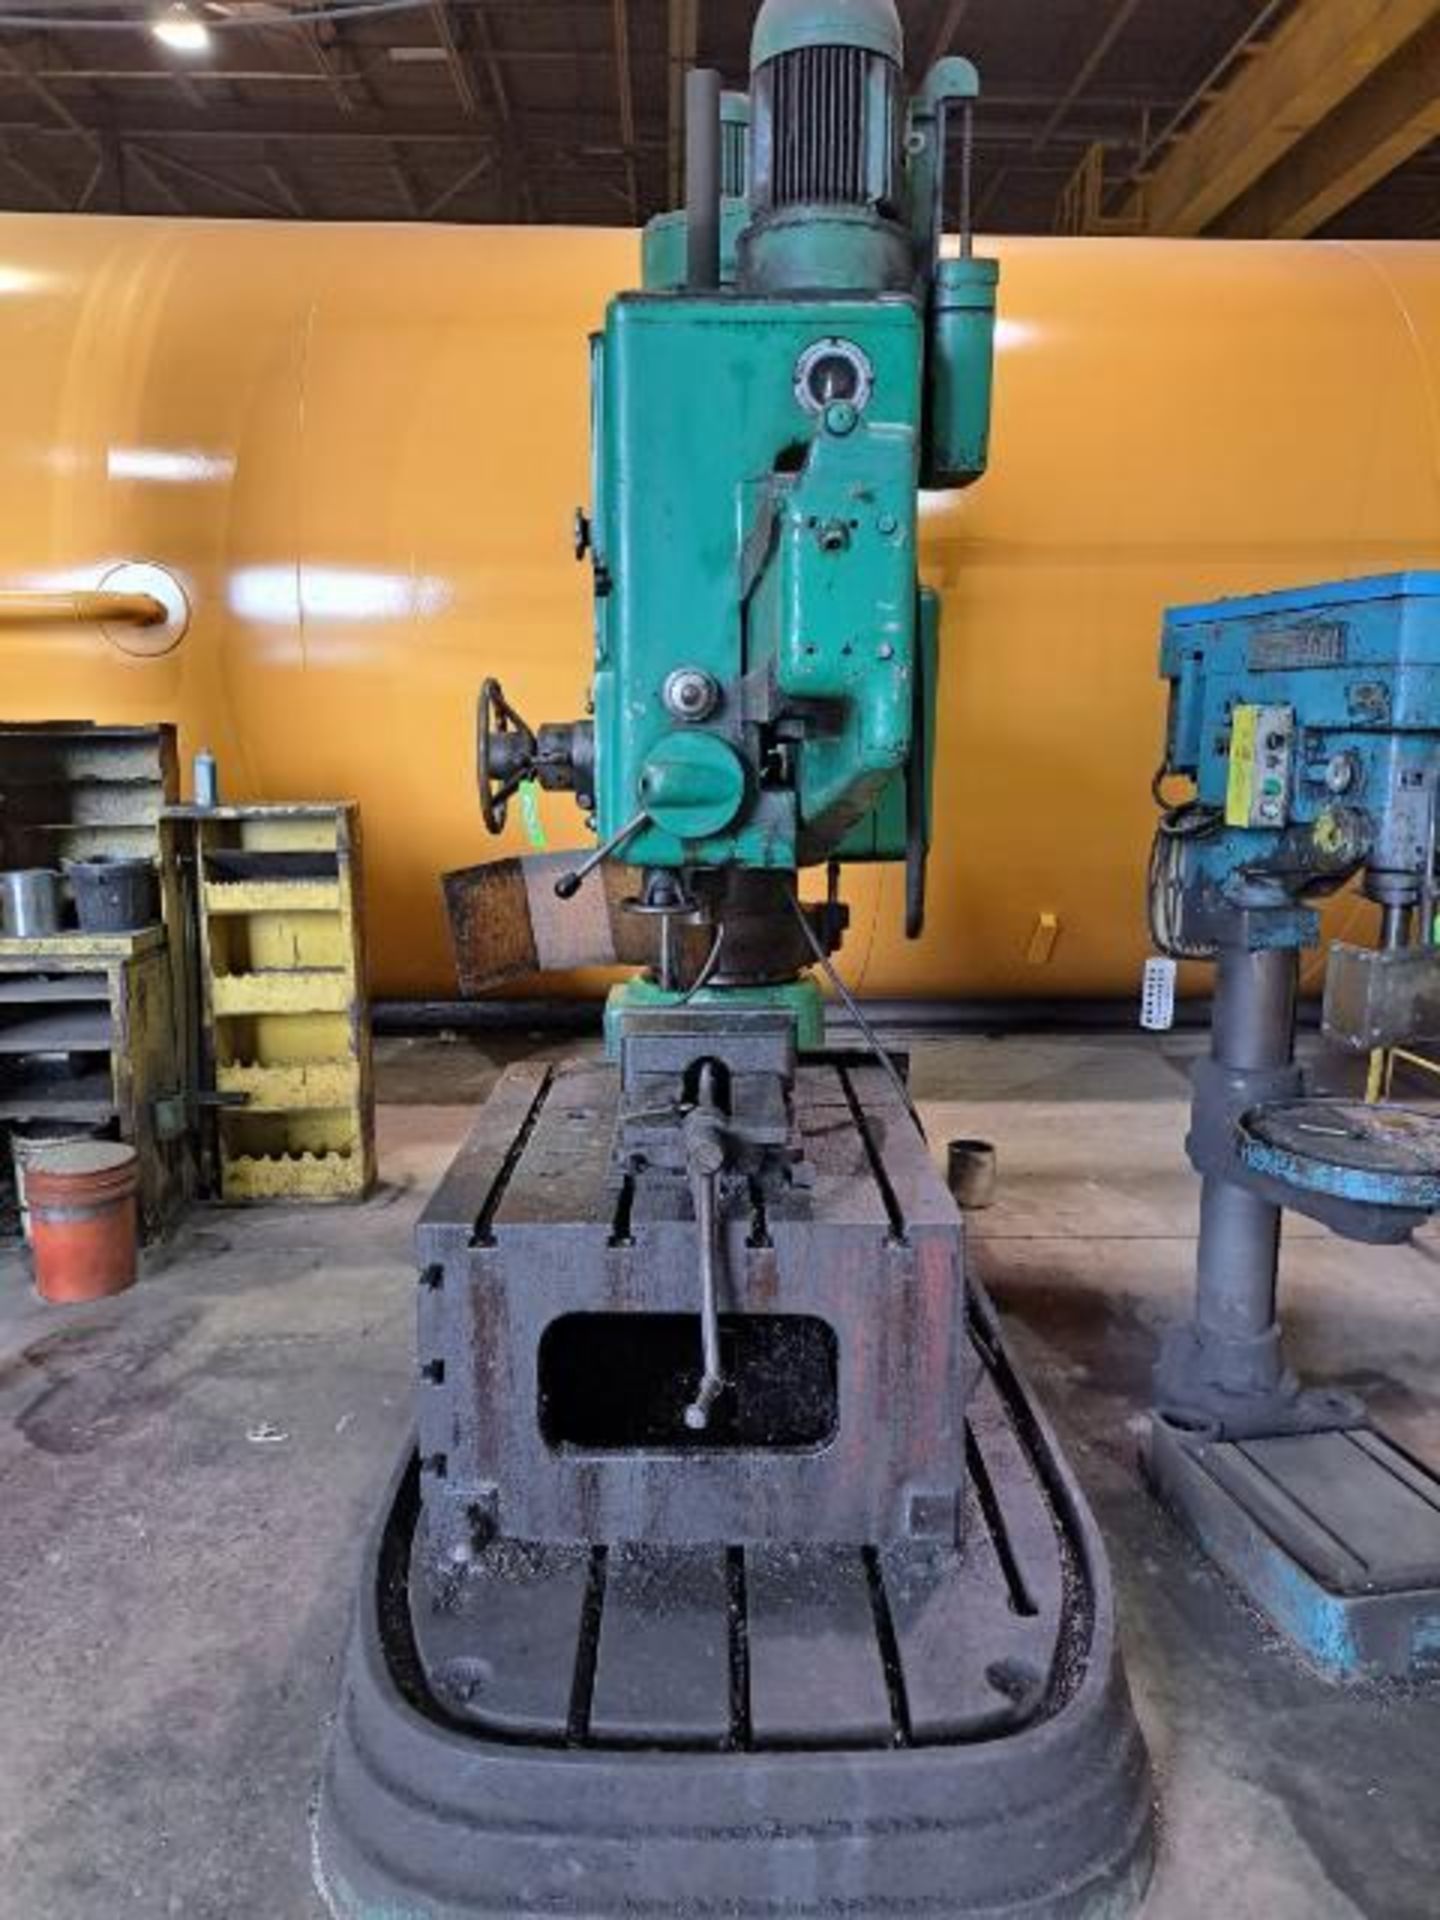 CASER F60-2000, 7' RADIAL ARM DRILL WITH 42"W X 36"L X 22"D, 14" MACHINE VISE, S/N 71005 (SOUTH CENT - Image 3 of 6